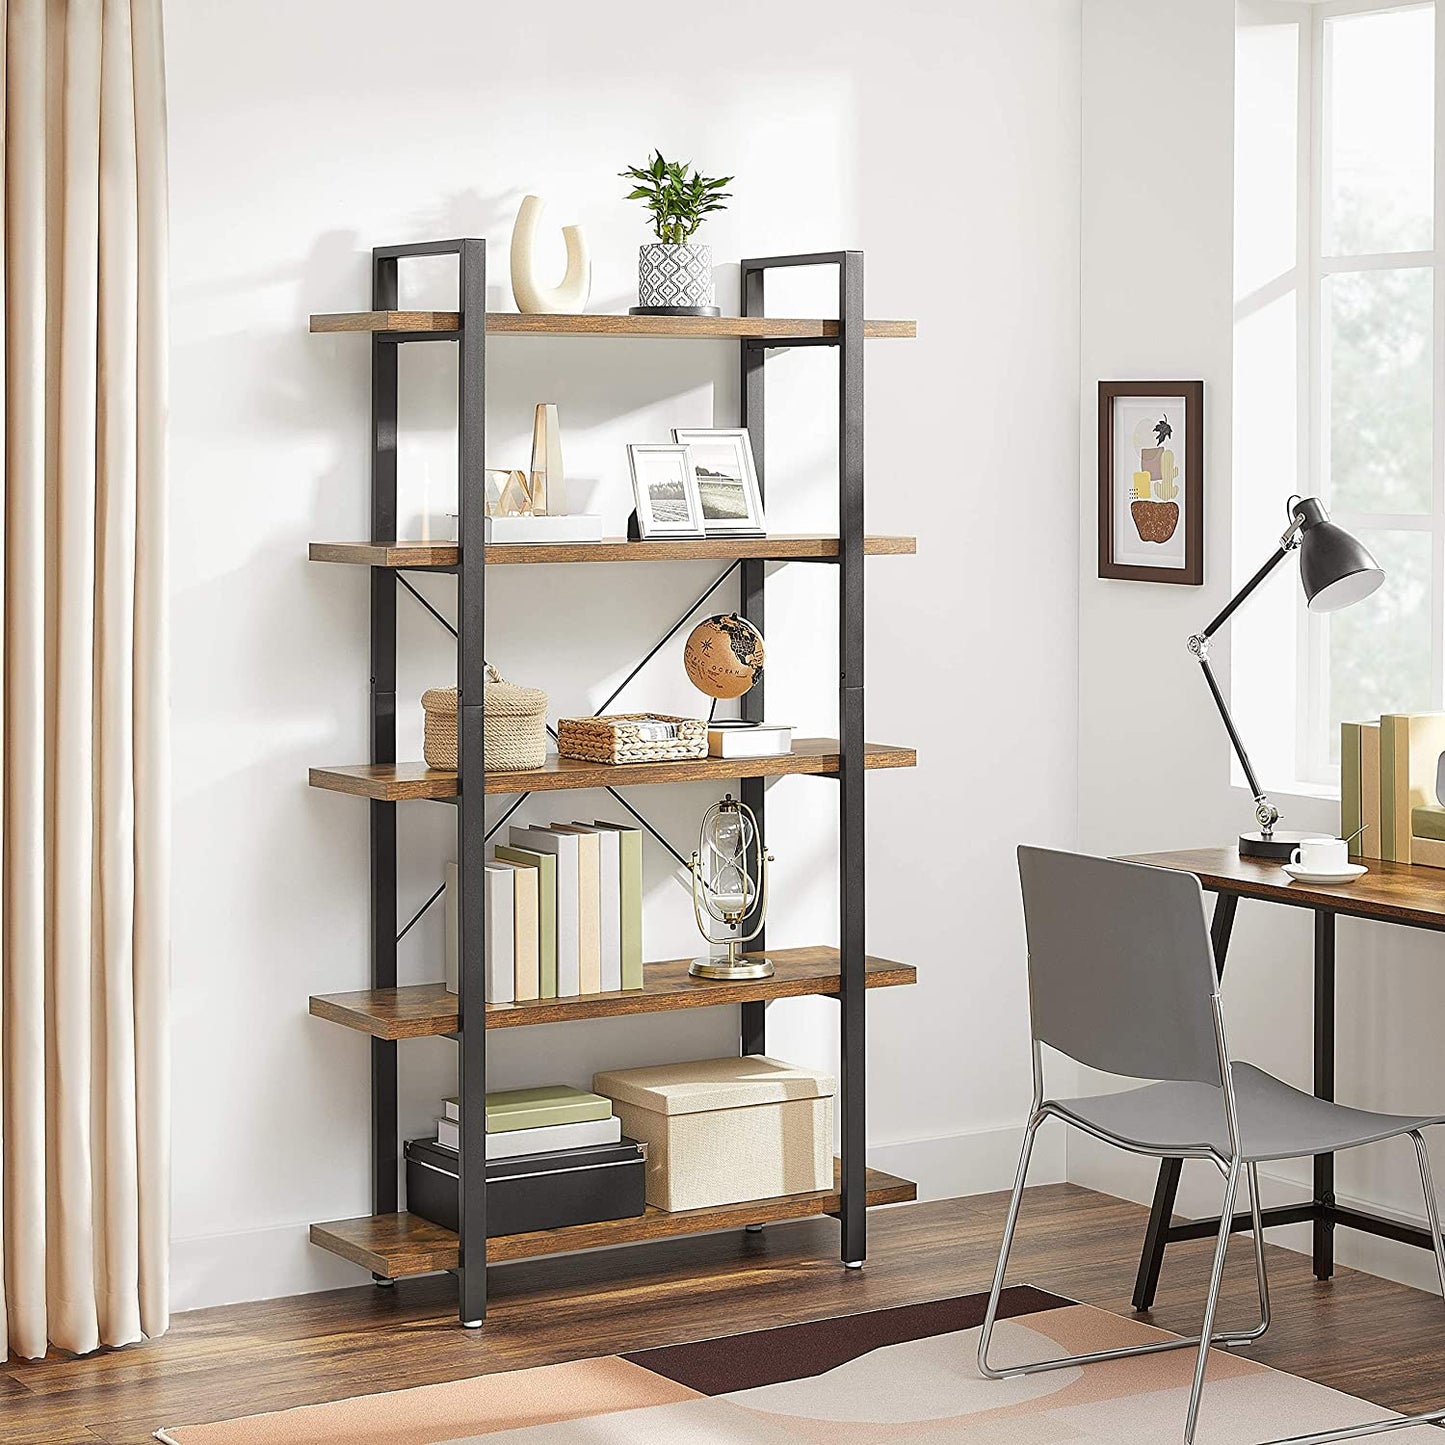 Bookshelf 5-Tier Industrial Stable Bookcase Rustic Brown and Black - image7